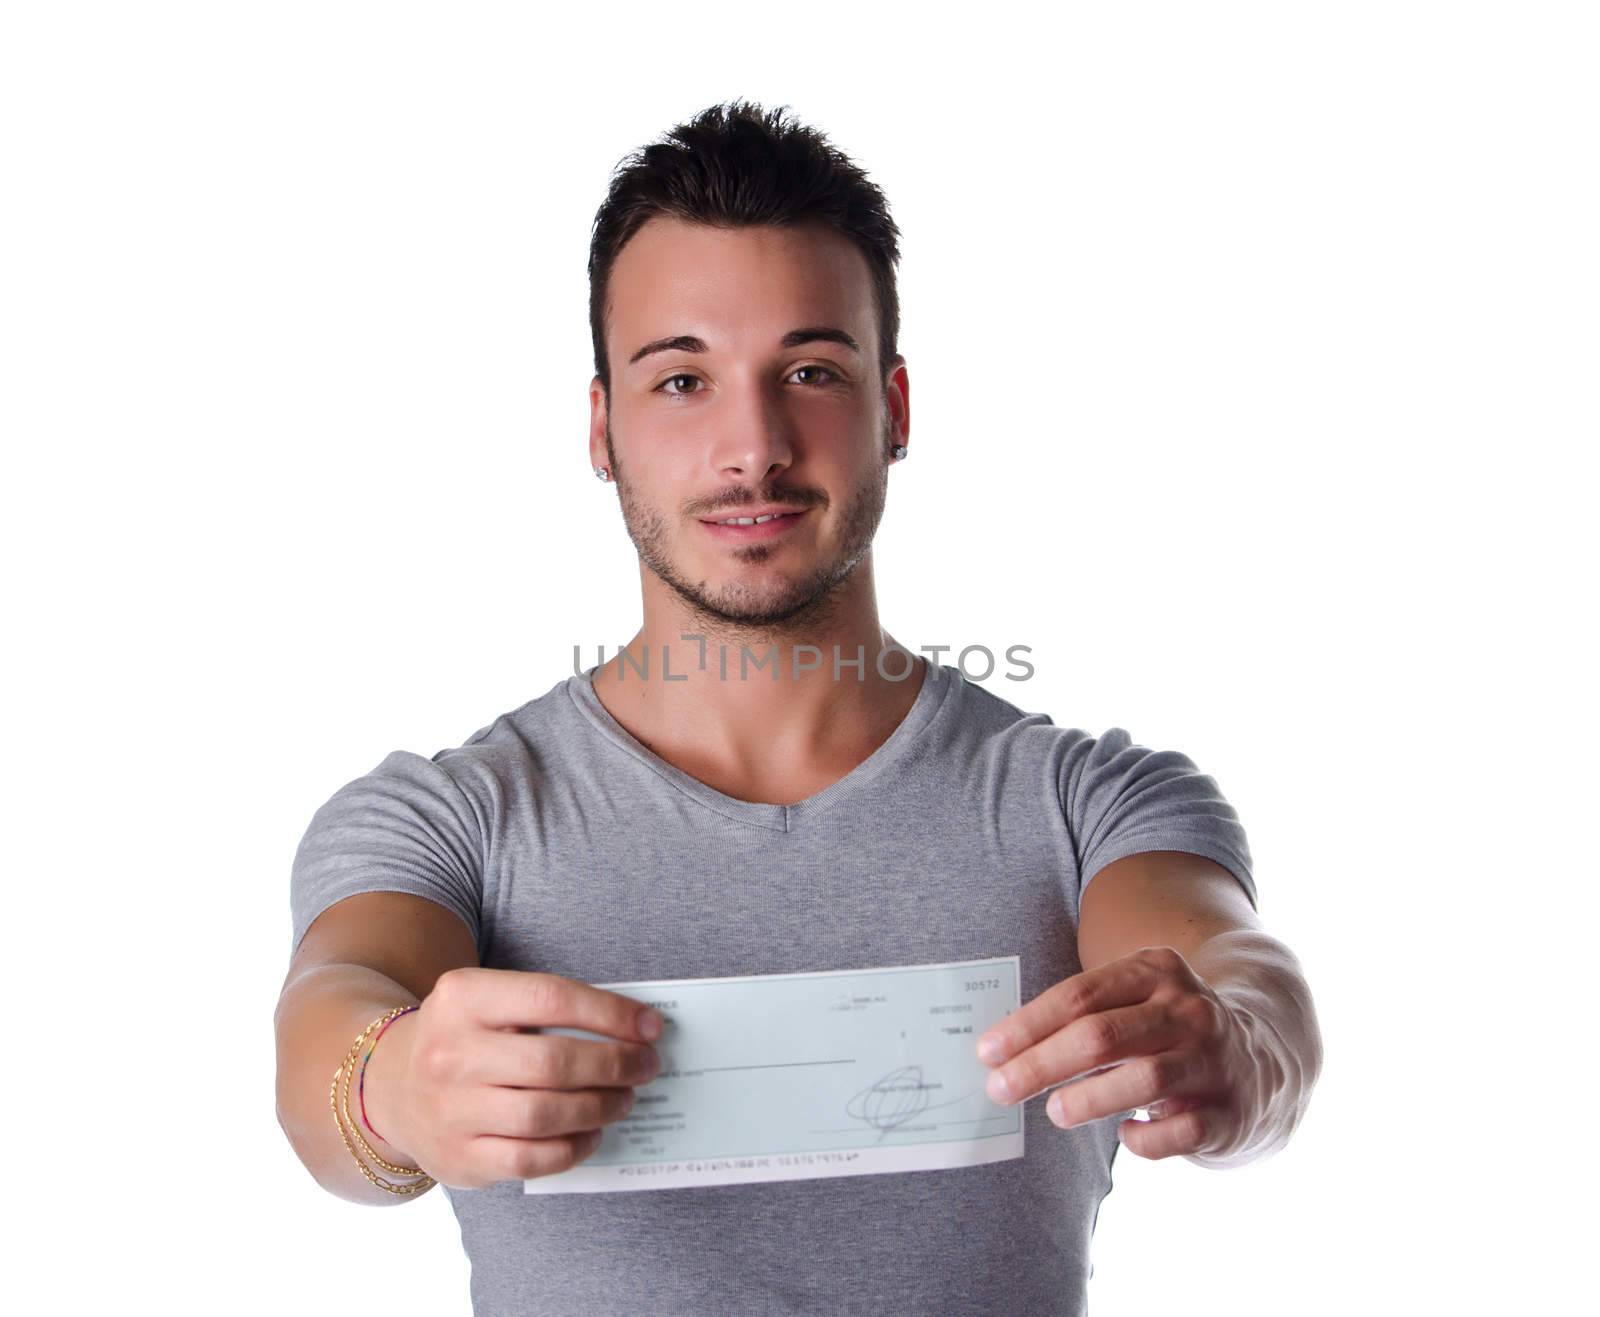 Young man showing check (cheque) in his hands, looking at camera